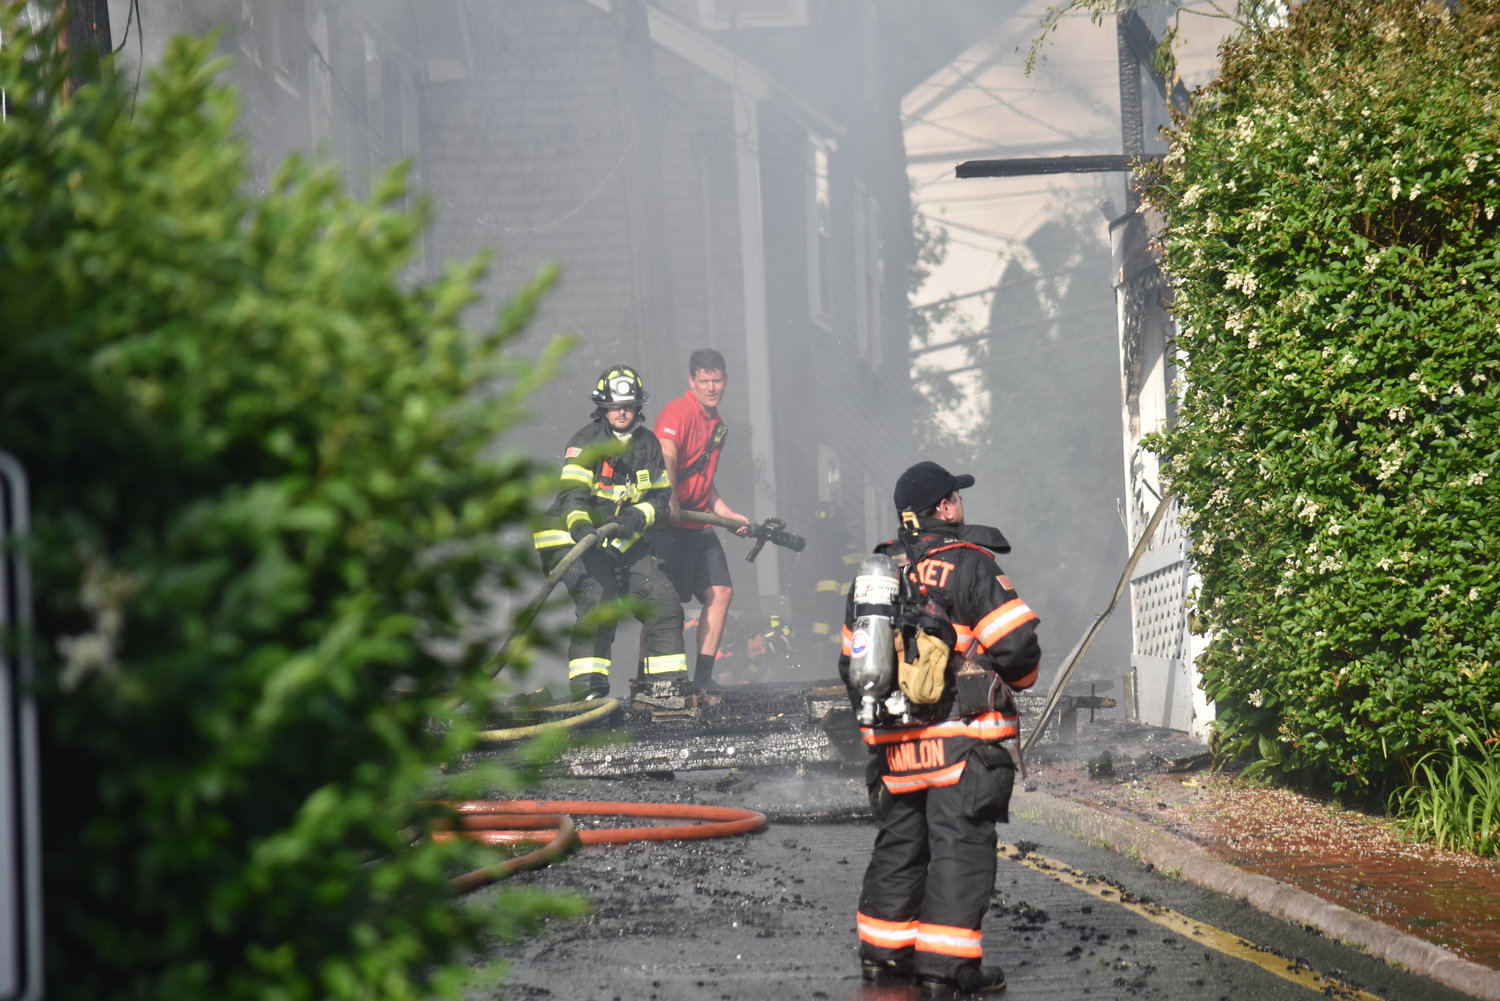 Firefighters put water on the blaze from Step Lane.